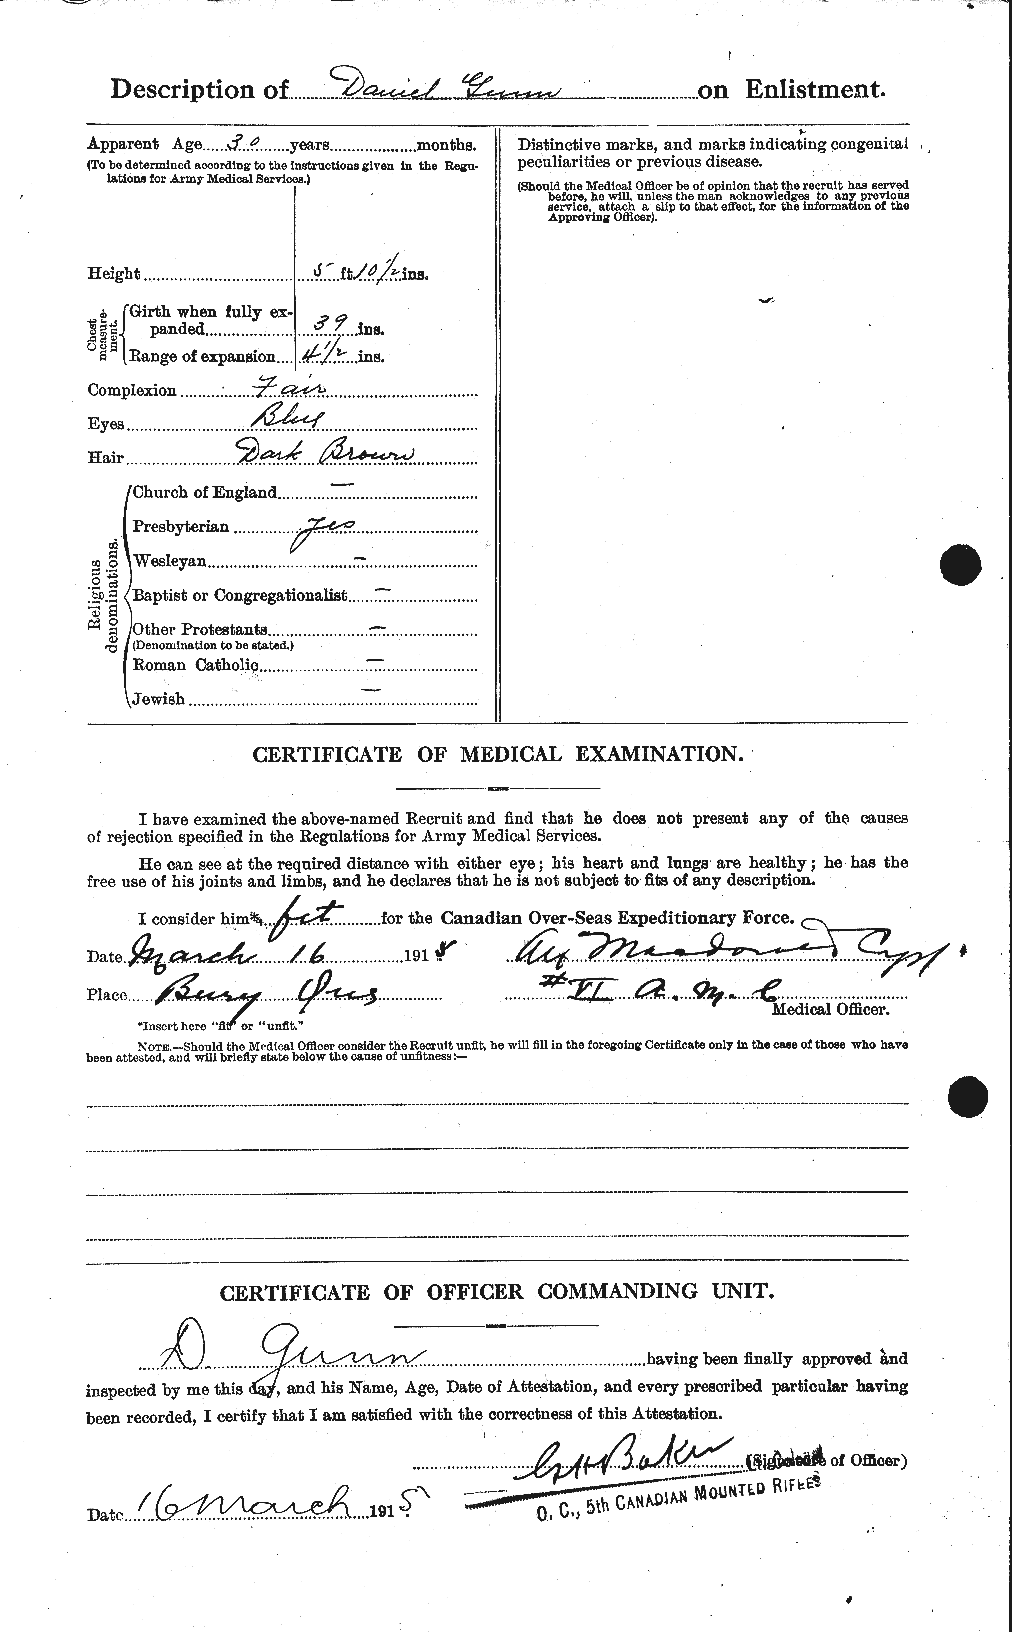 Personnel Records of the First World War - CEF 368019b